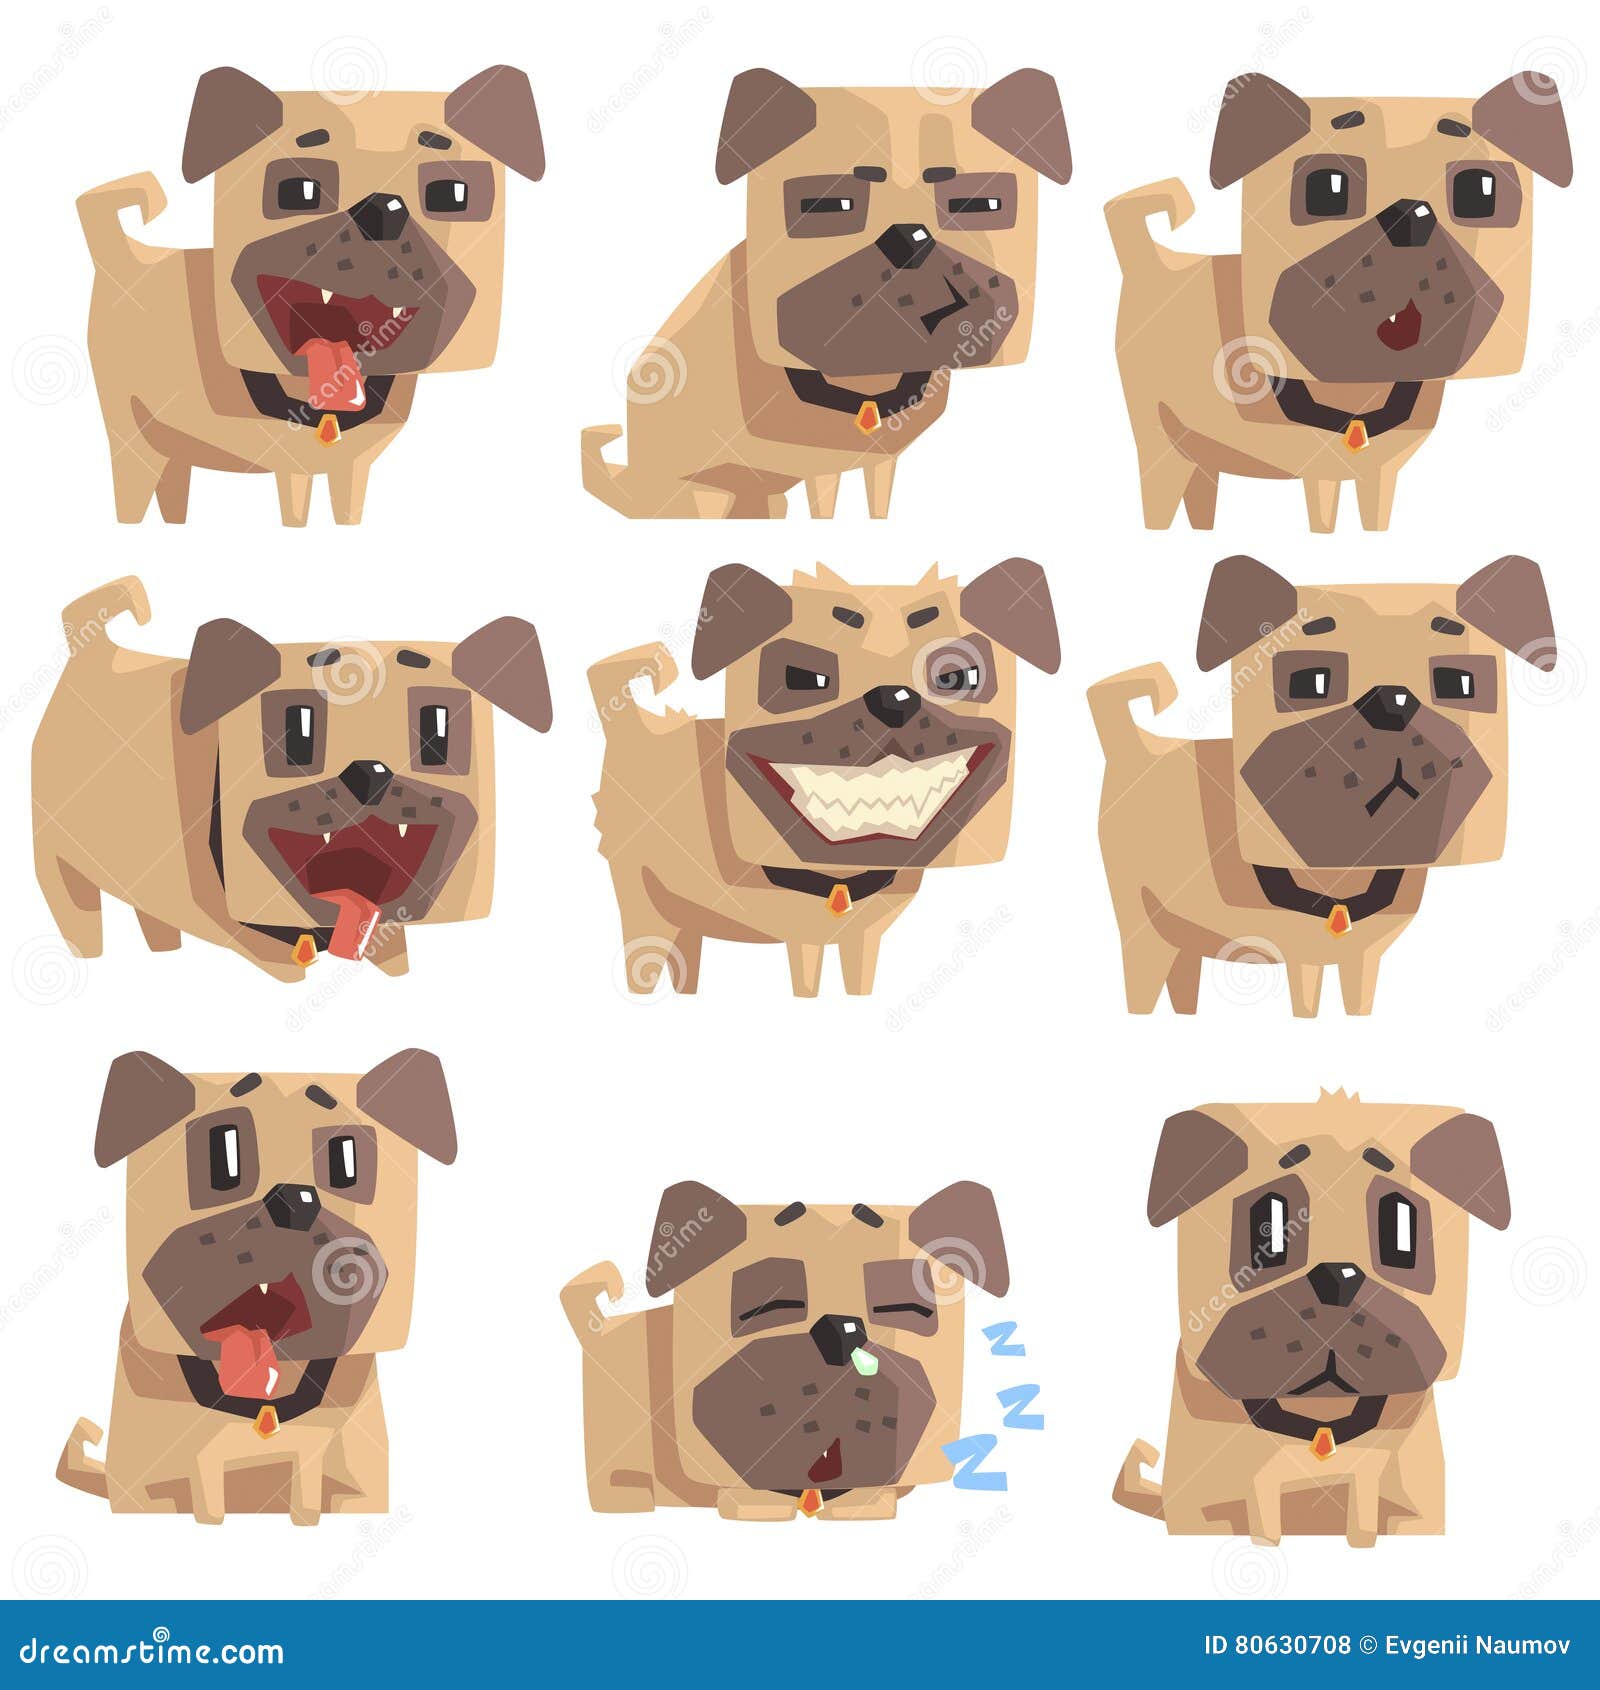 Little Pet Pug Dog Puppy with Collar Set of Emoji Facial Expressions and  Activities Cartoon Illustrations Stock Vector - Illustration of cheeky,  cool: 80630708